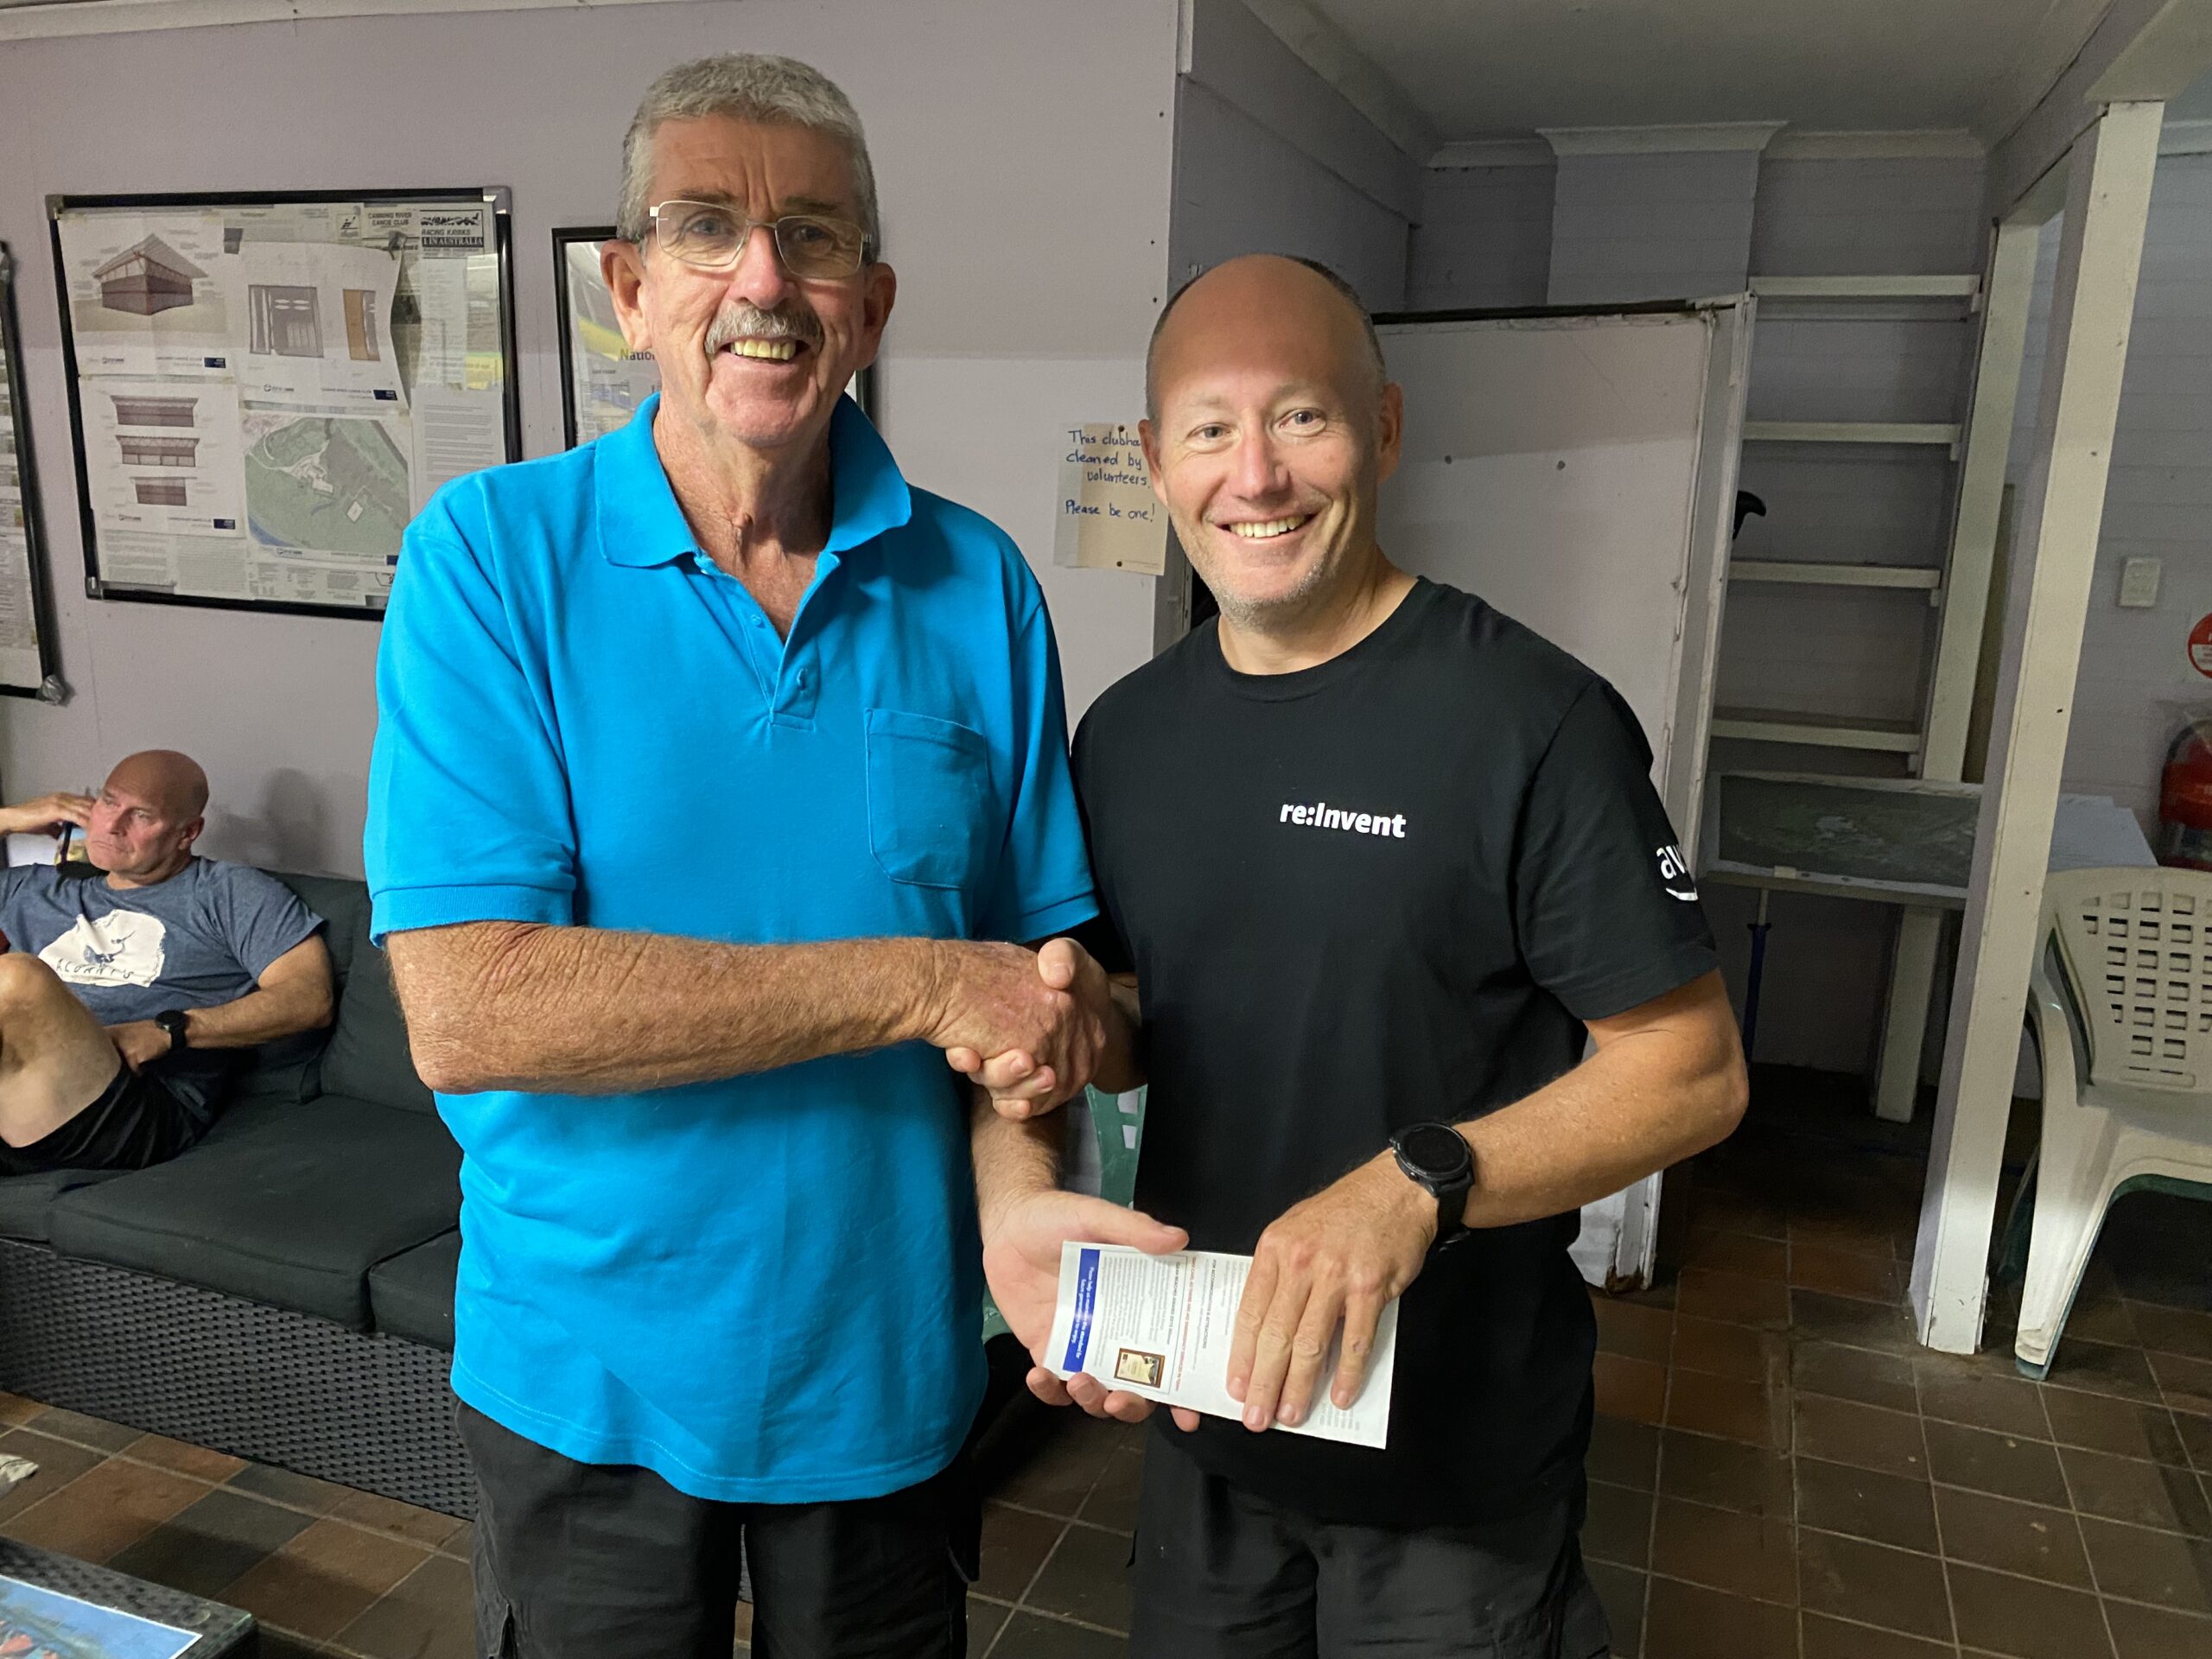 Tuesday 22nd November 2022 : Tonight’s photo shows club Vice President David Griffiths presenting tonight’s winner Alistair Fox with a movie voucher.